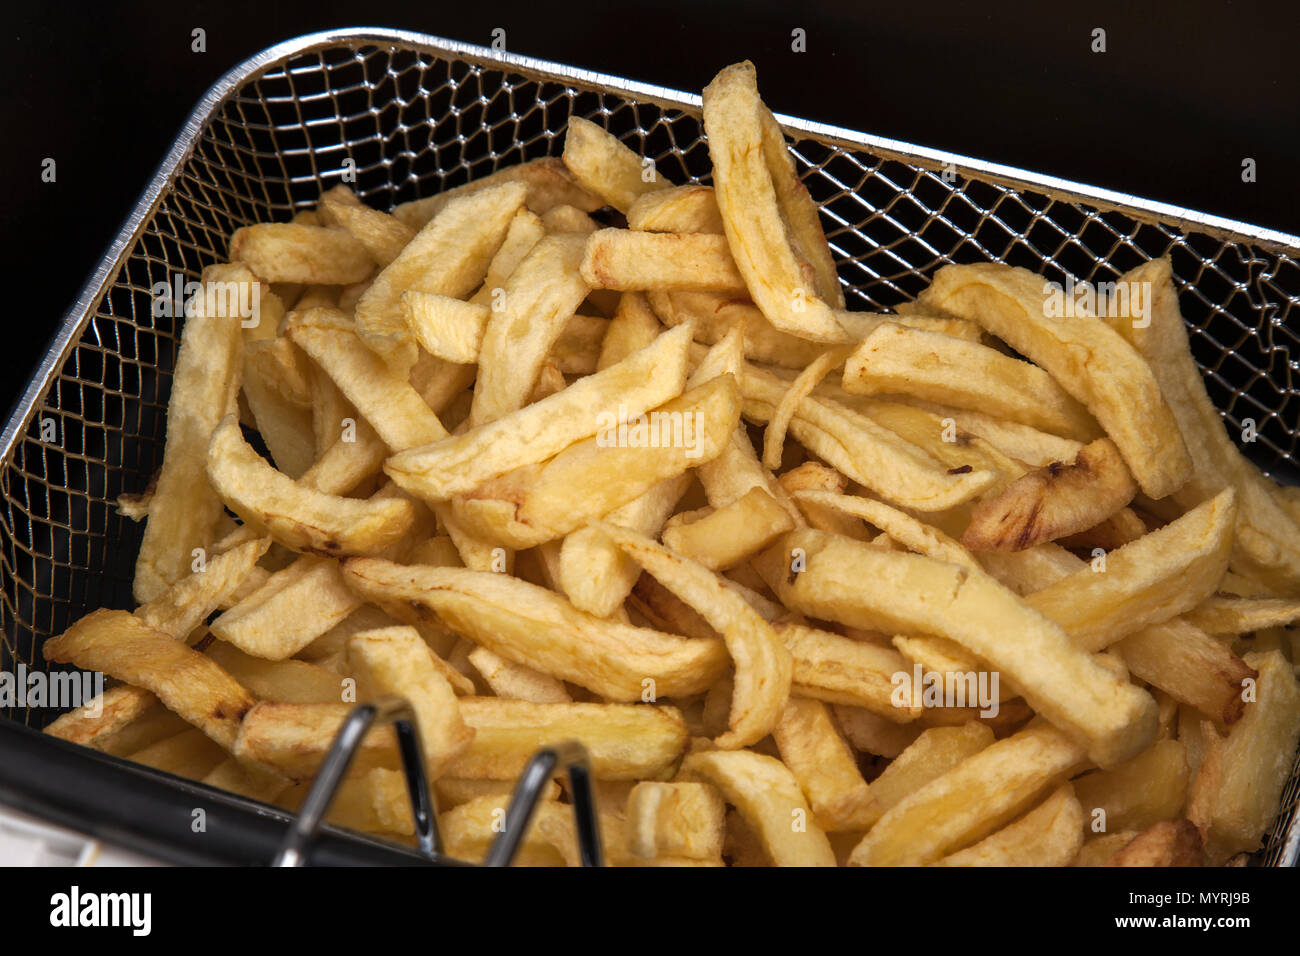 French fries, top view Stock Photo